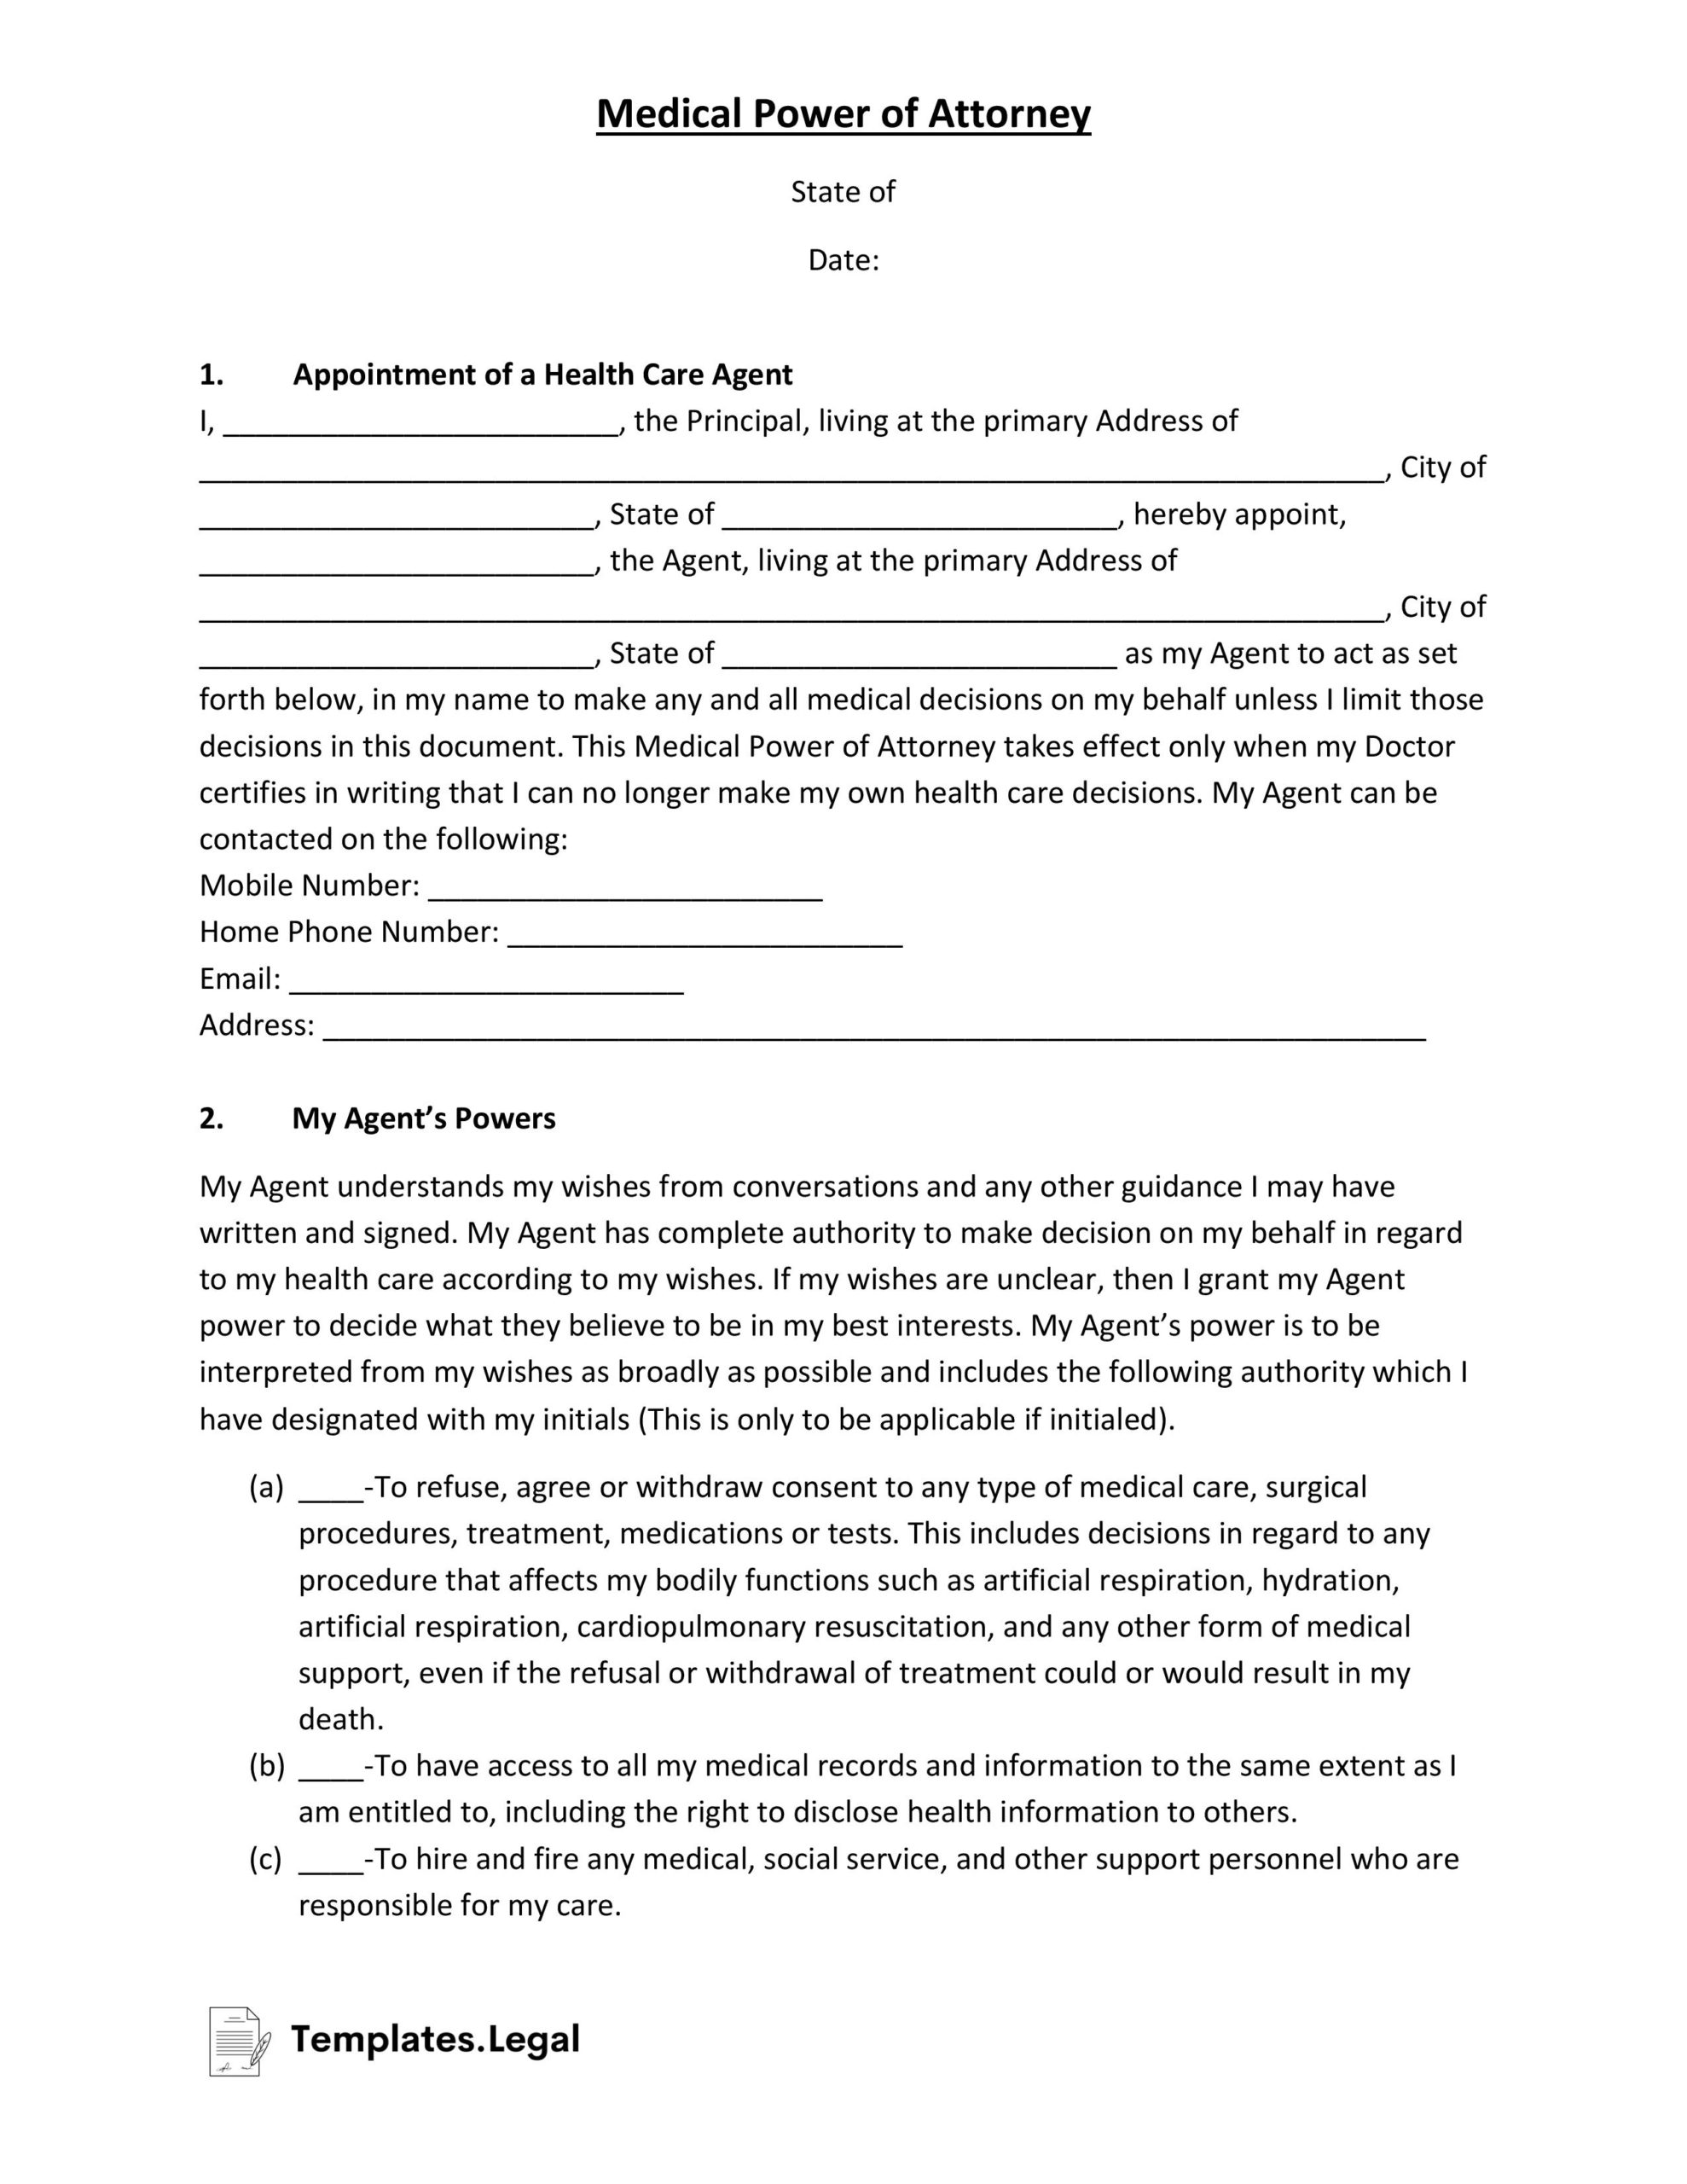 Standard Medical Power of Attorney Templates